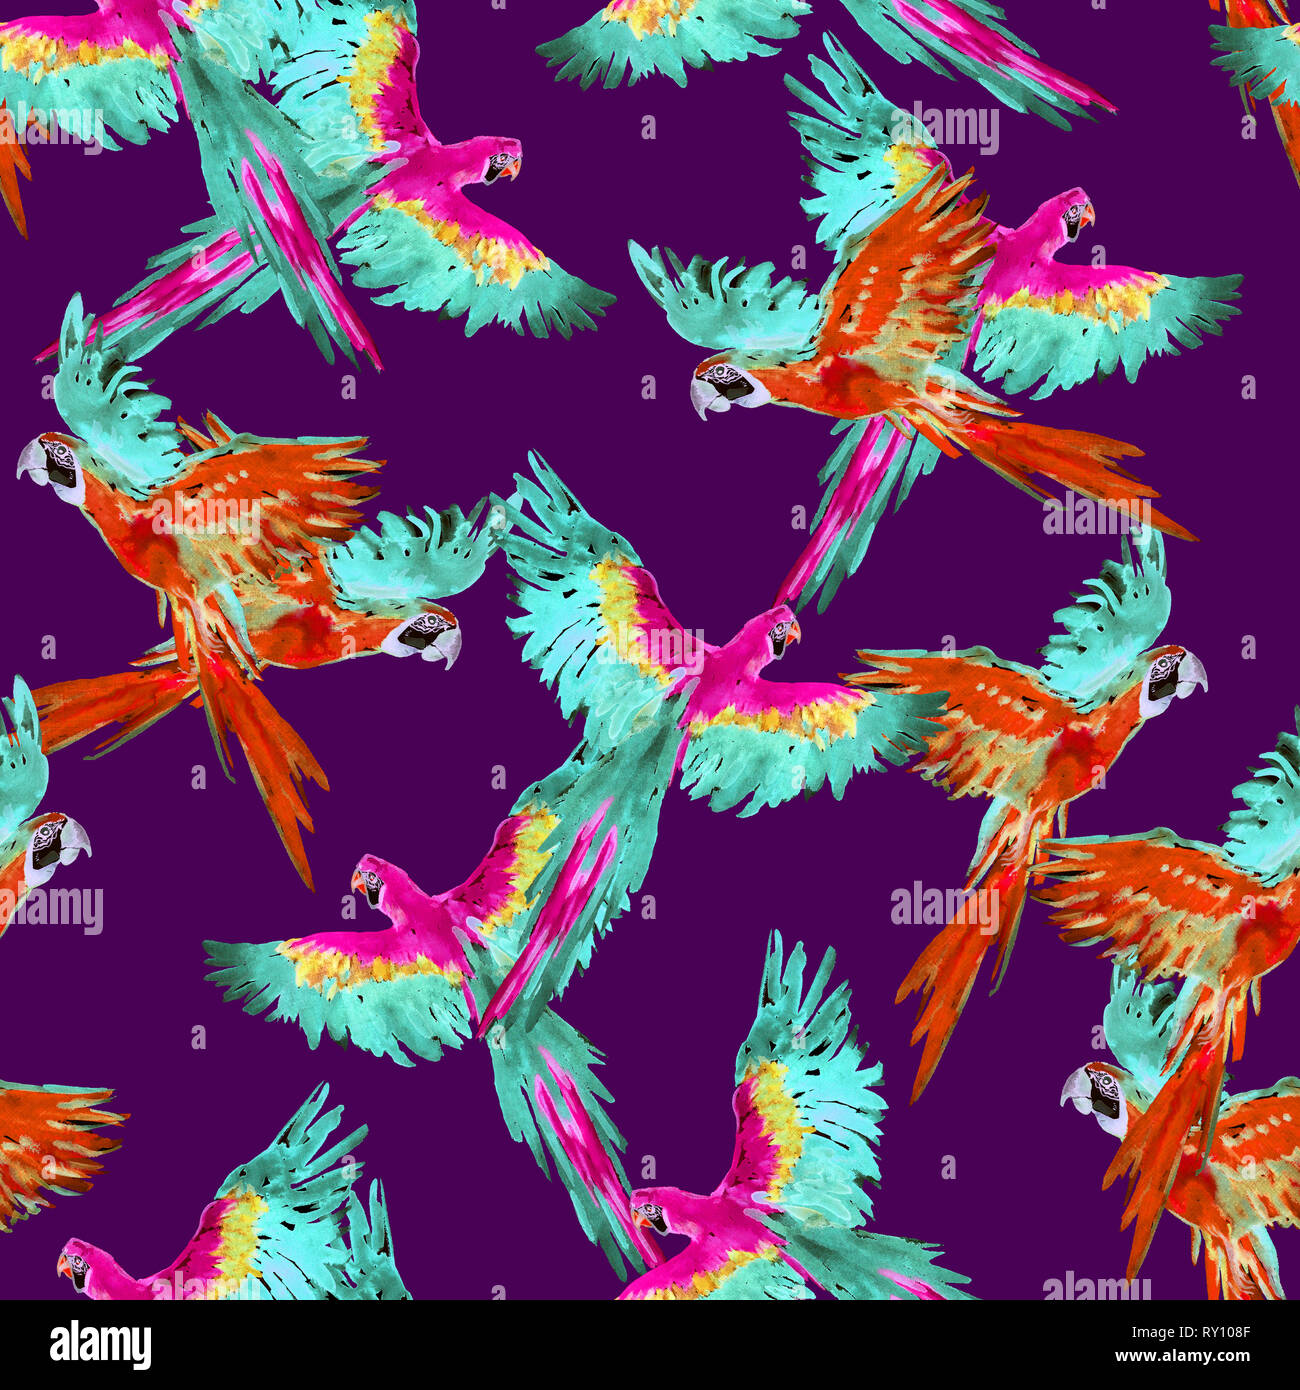 Blue and yellow and Scarlet macaw flying, seamless pattern design, hand painted watercolor illustration, purple background Stock Photo